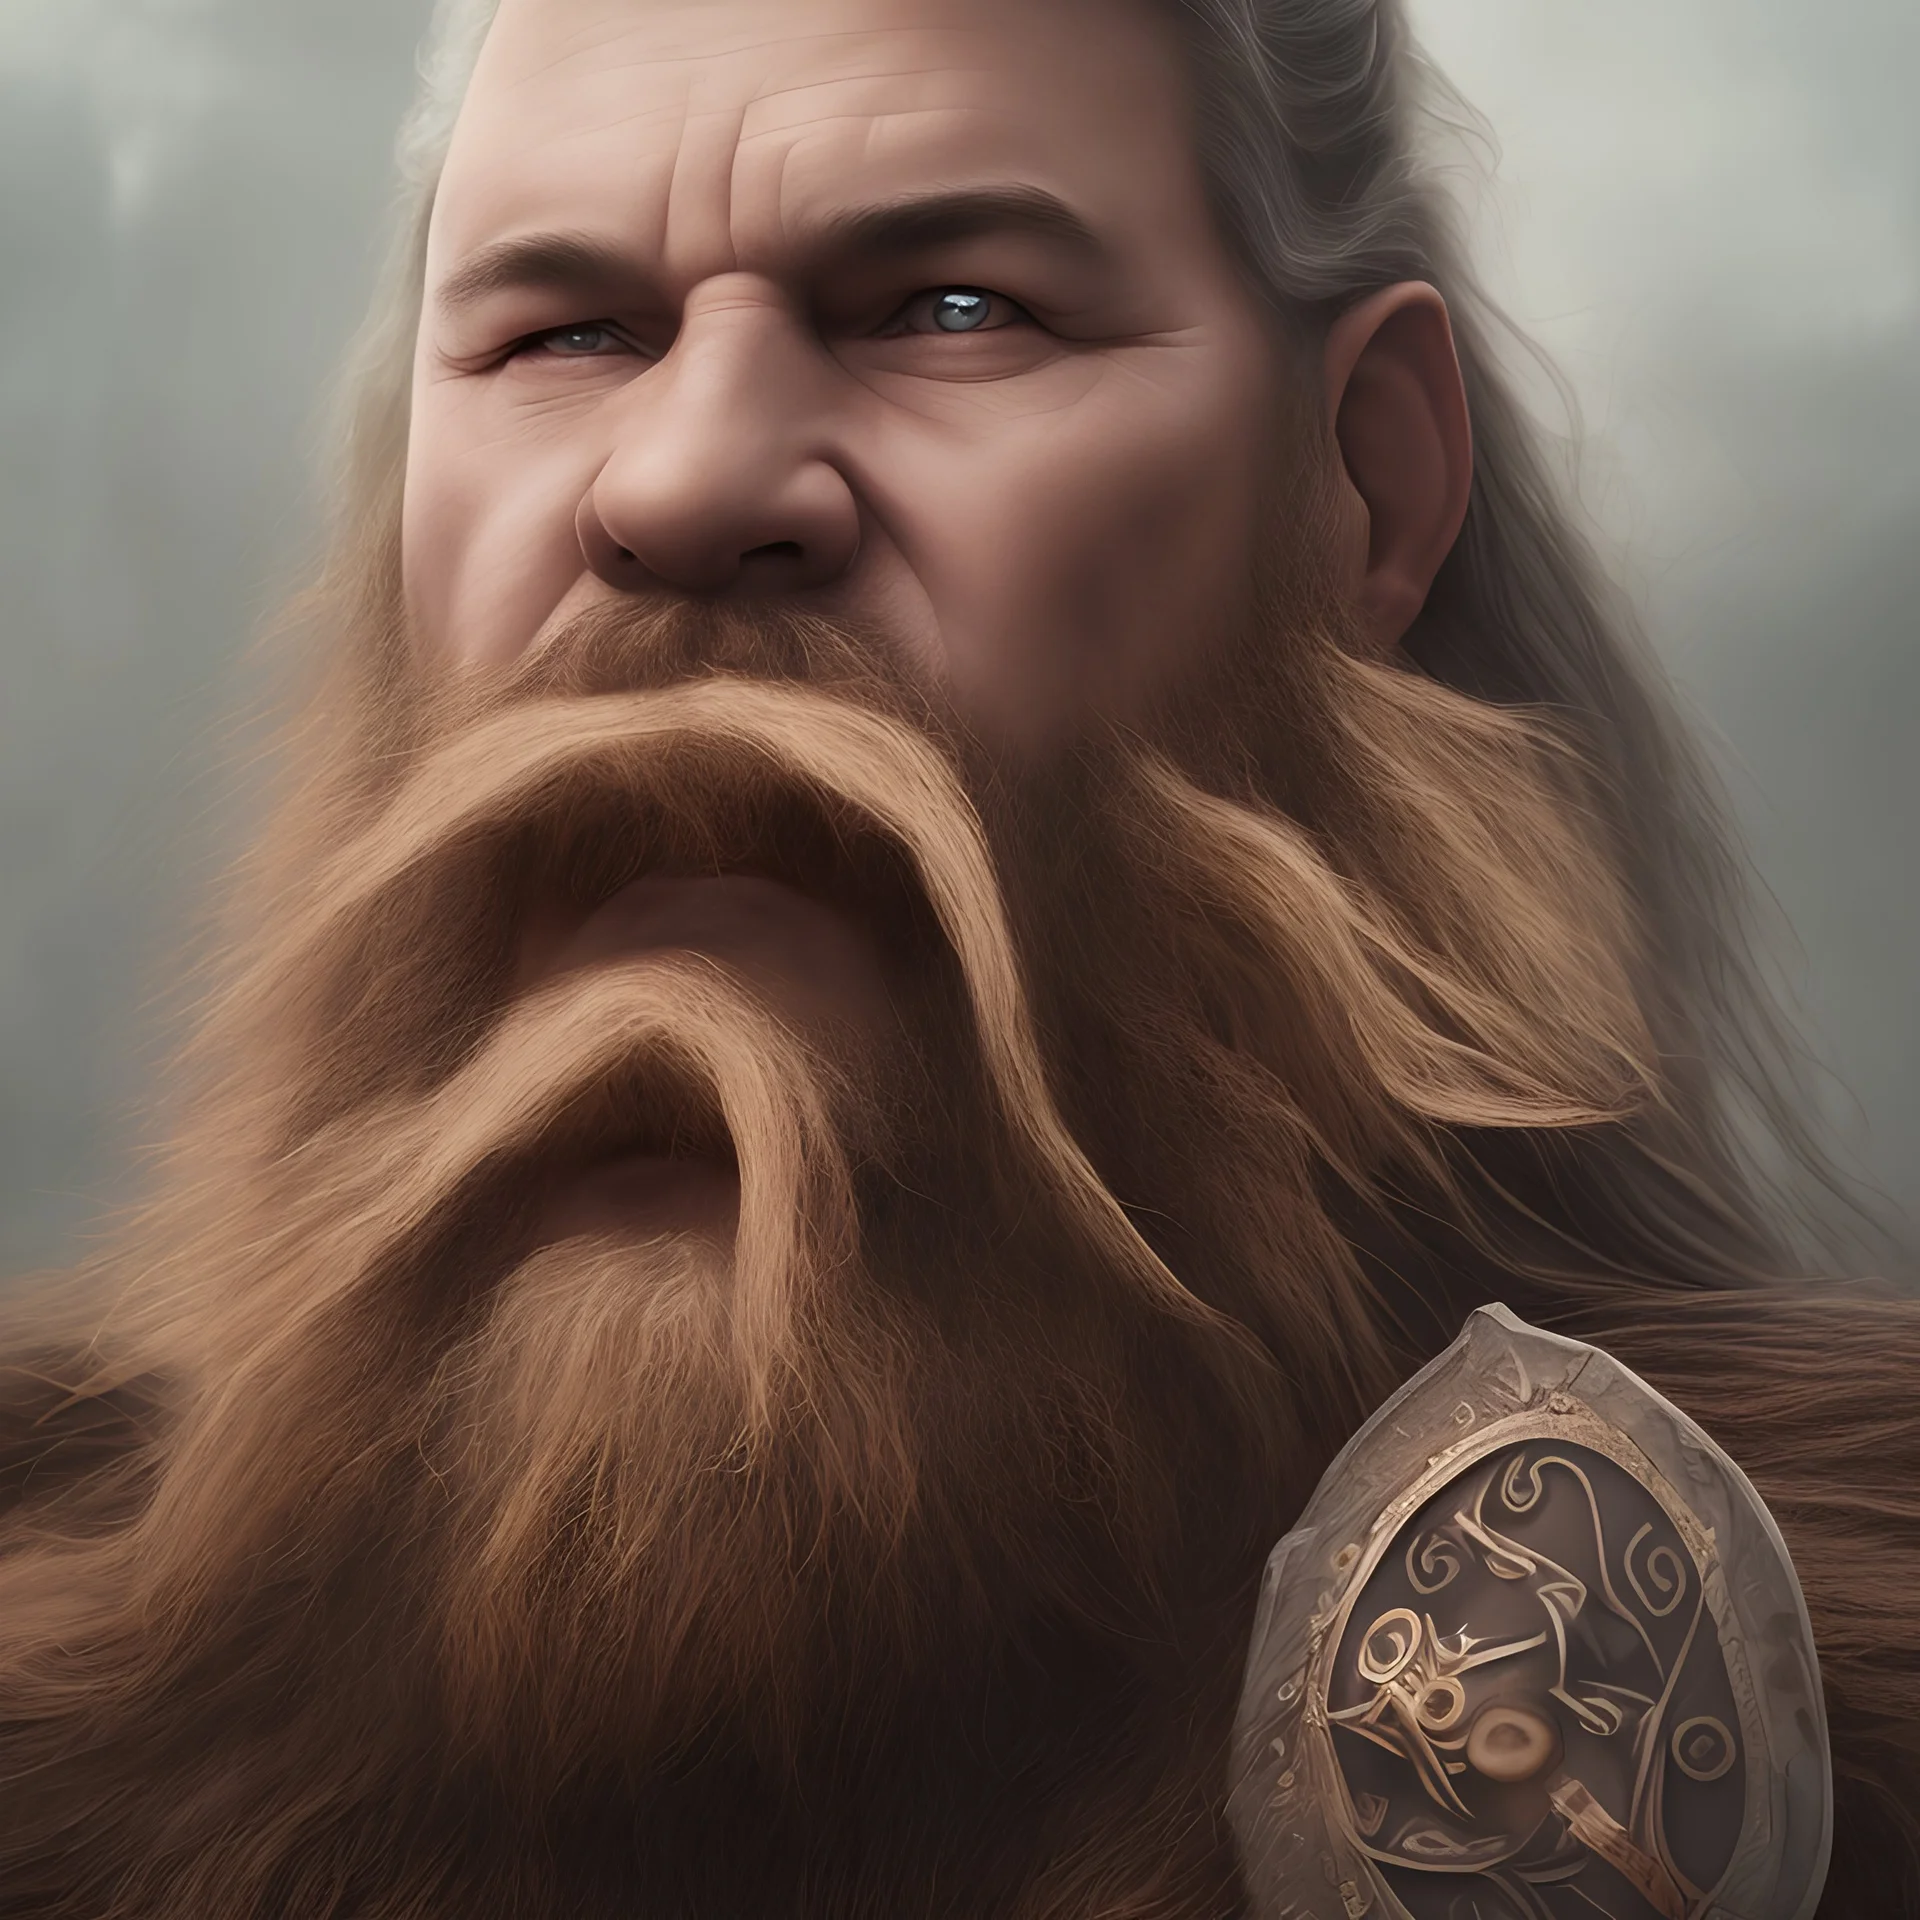 portrait photo of two 55 years old vikings embraced muscular chubby and hairy beard manly chest hairy shoulders emotive eyes hyper-realistic 4k cinematic photographic